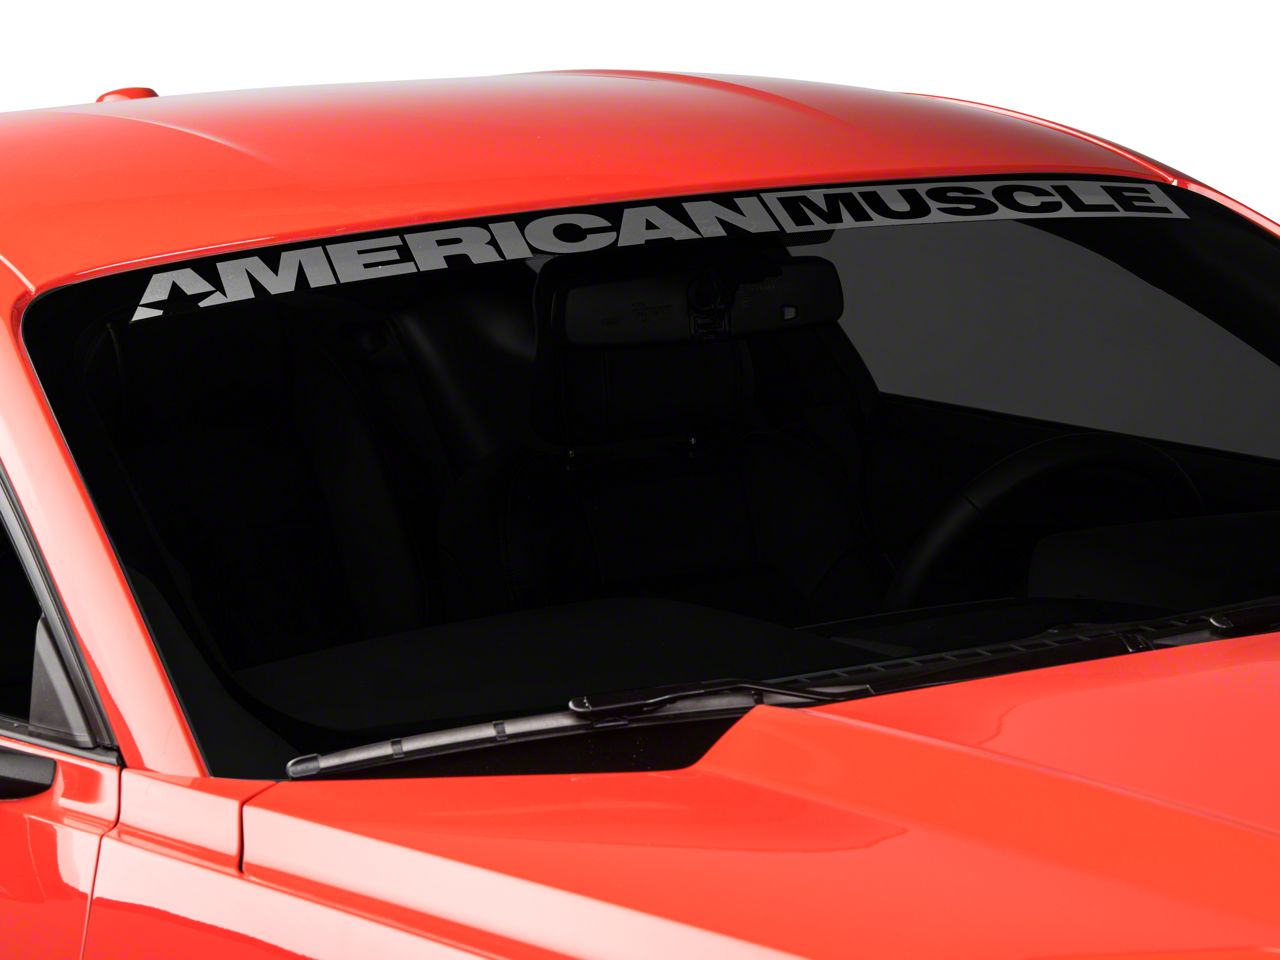 American Muscle Graphics Mustang AmericanMuscle Windshield Banner ...